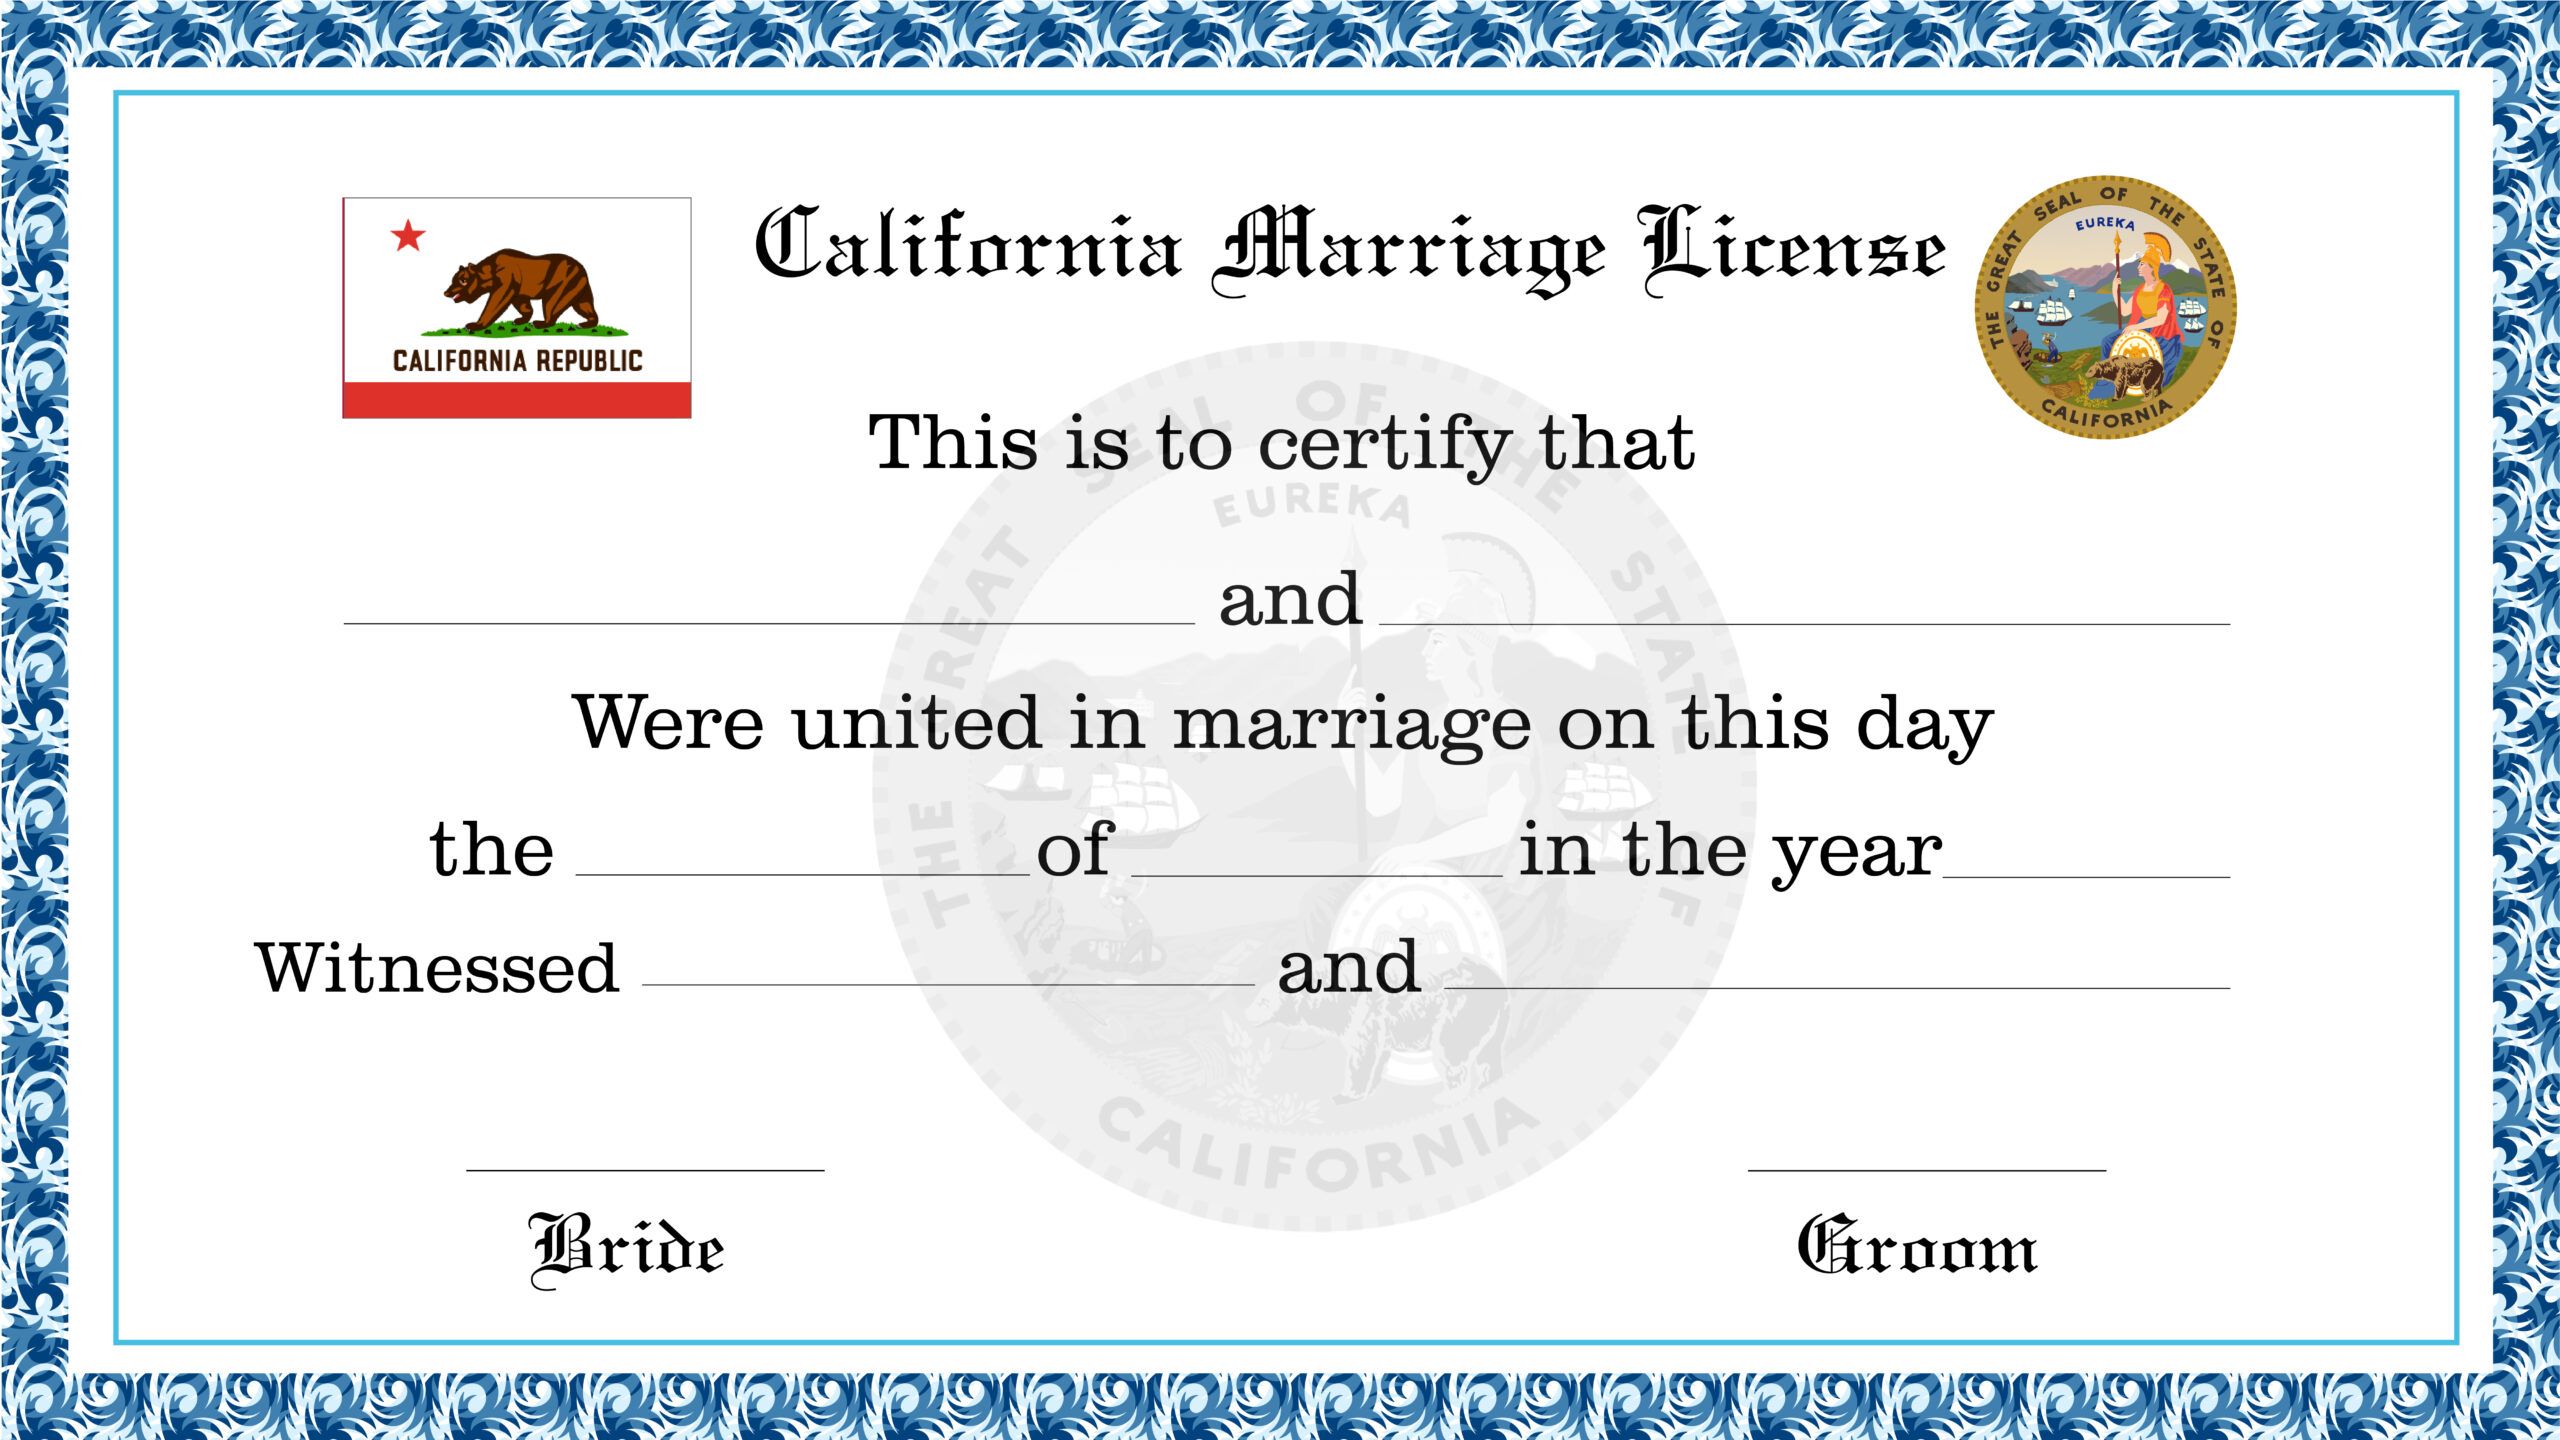 california-marriage-license-license-lookup